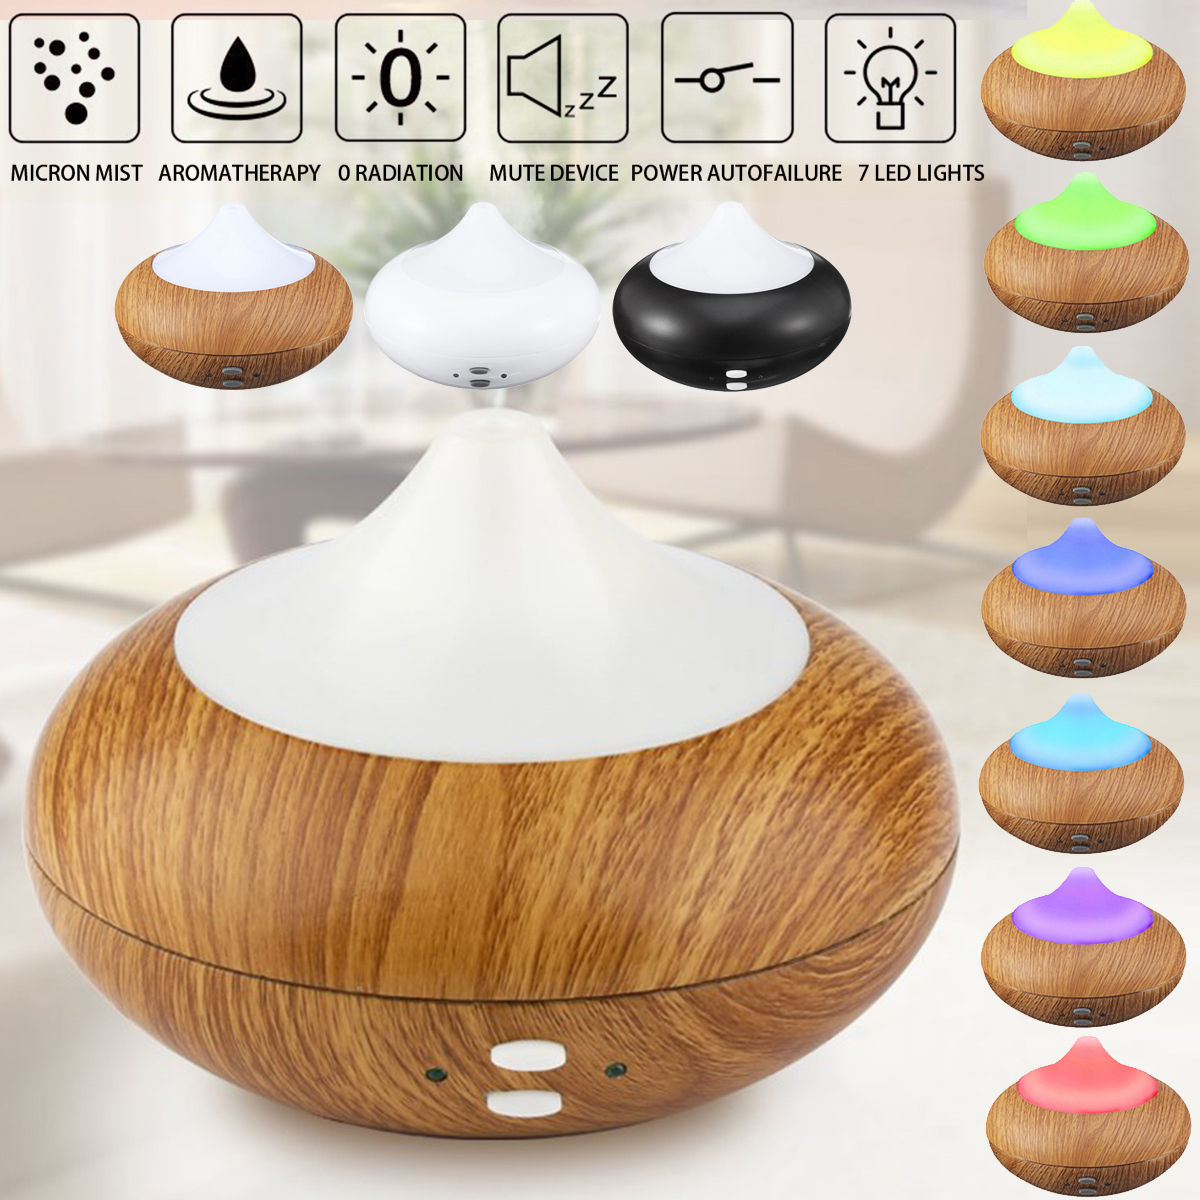 7 Colour LED Oil Ultrasonic Aroma Aromatherapy Diffuser Air Humidifier Purifier 17